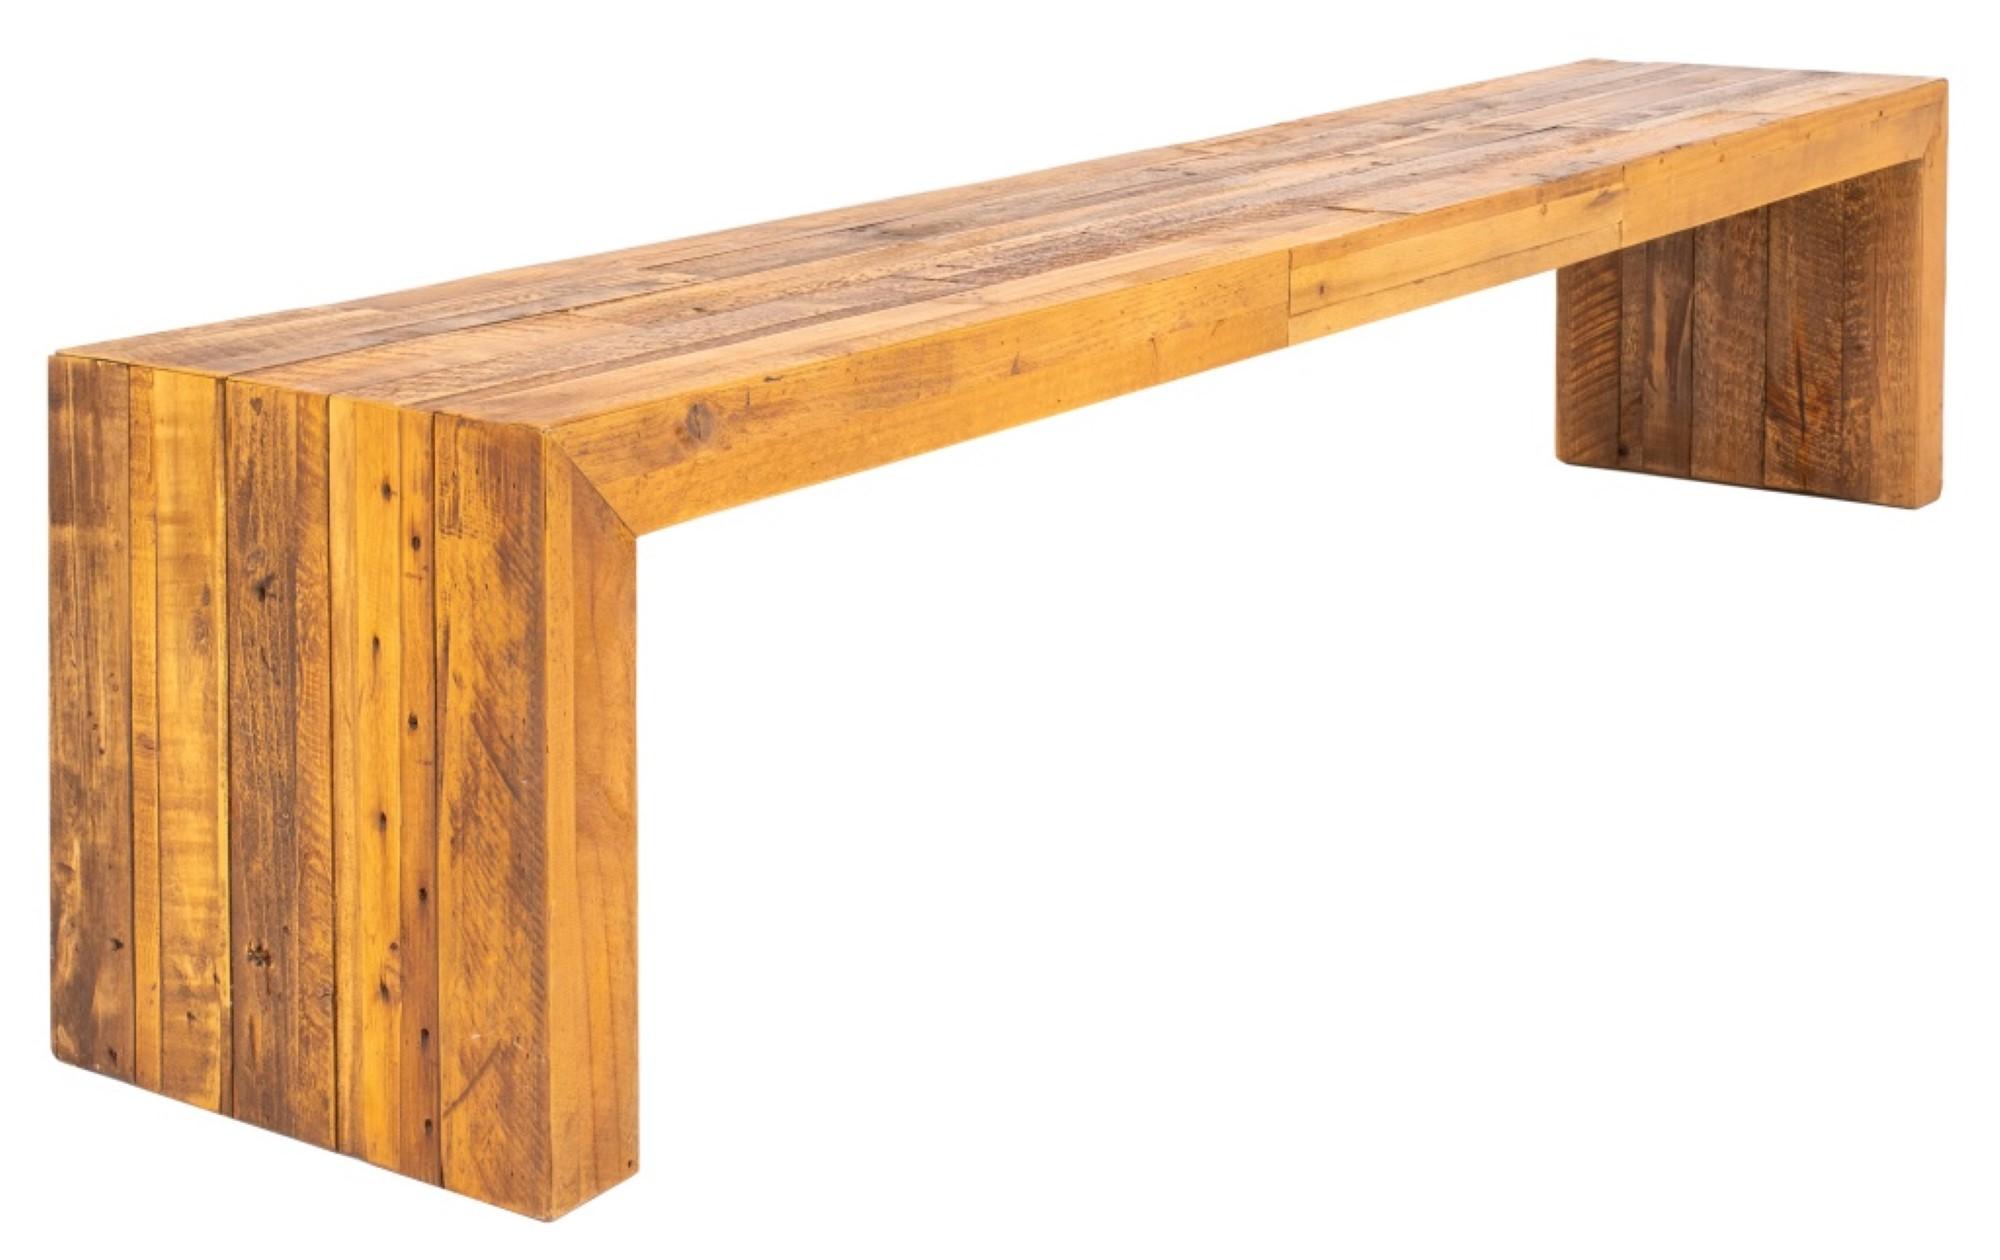 
The KT Rustic Oak Hardwood Bench has dimensions of approximately 18 inches in height, 84.5 inches in width, and 15.75 inches in depth. This reclaimed oak bench is suitable for use in entryways or various other settings.




